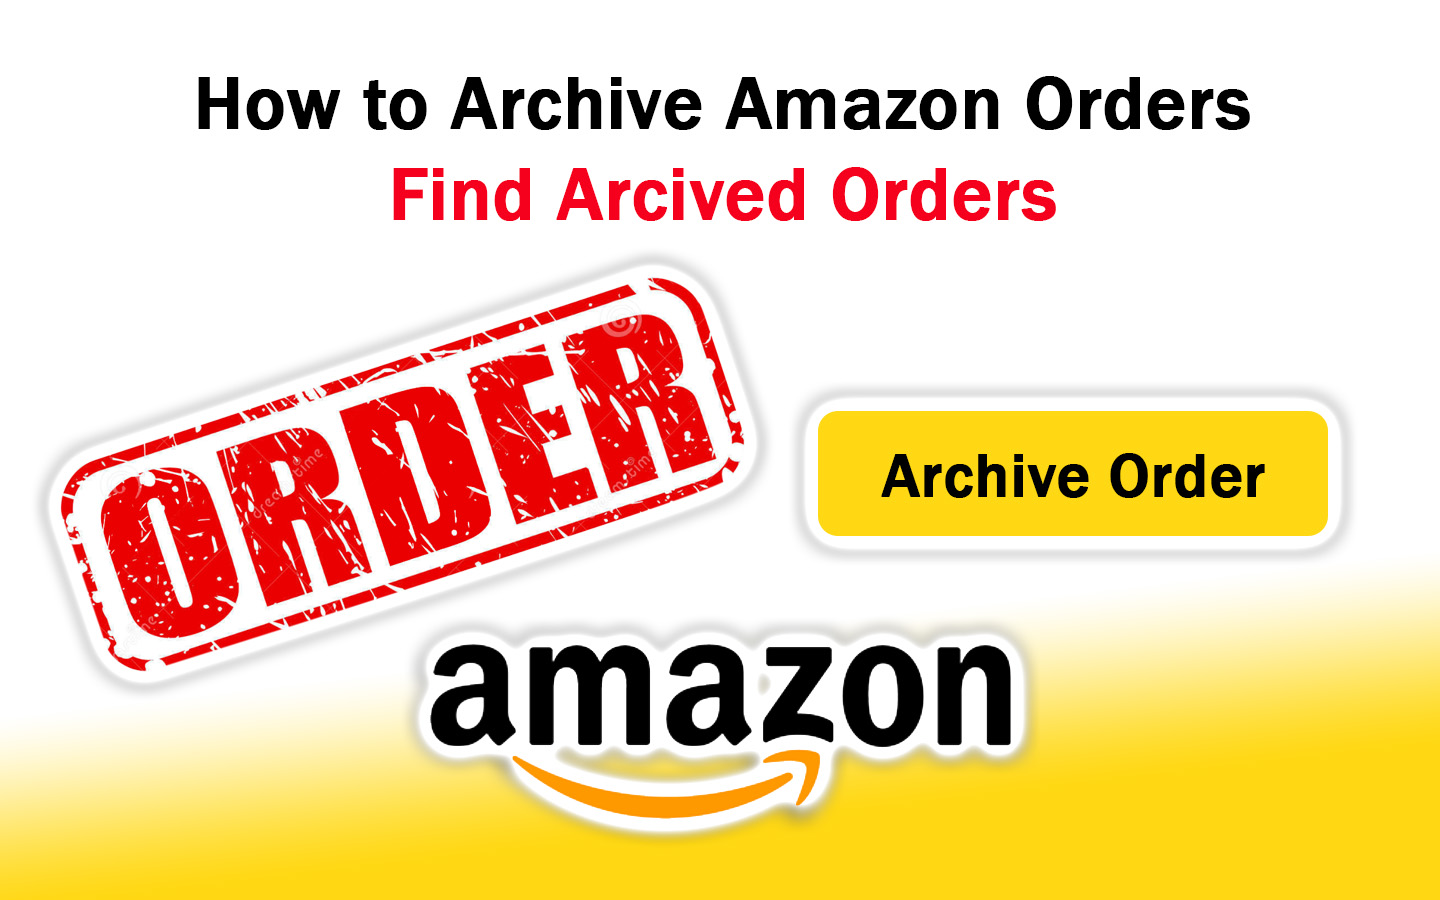 How to Archive Amazon Orders and Find Archived Orders